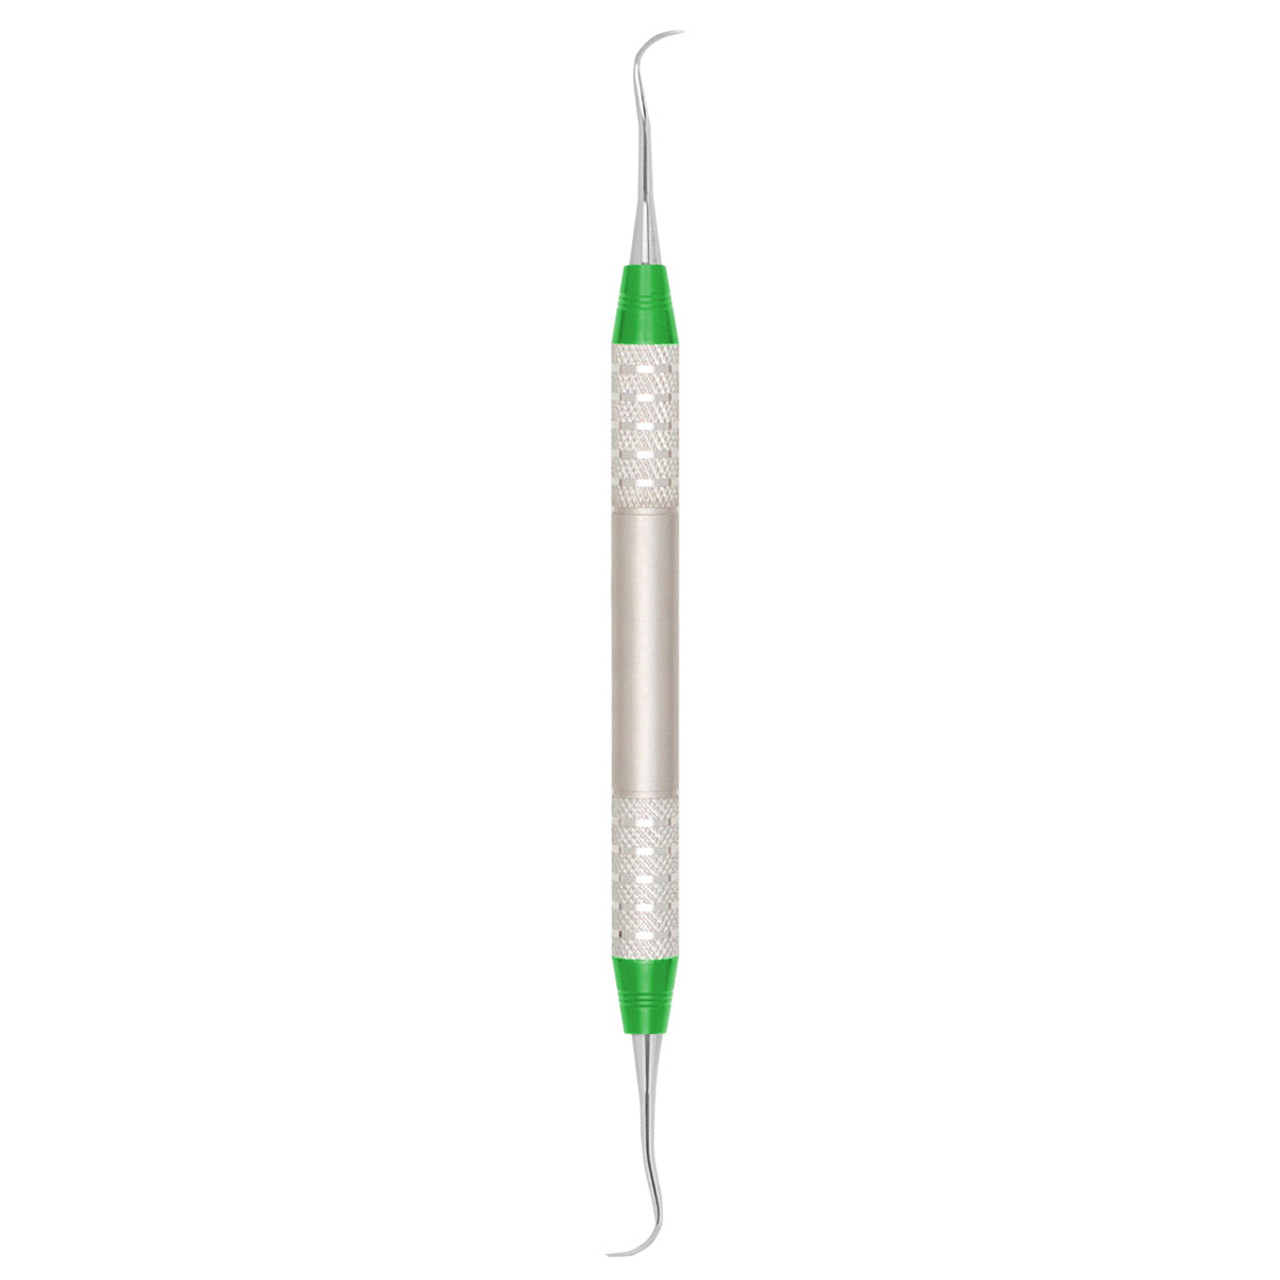 A.Titan - Universal Curette, Small, gently curved blade D Lite Handle